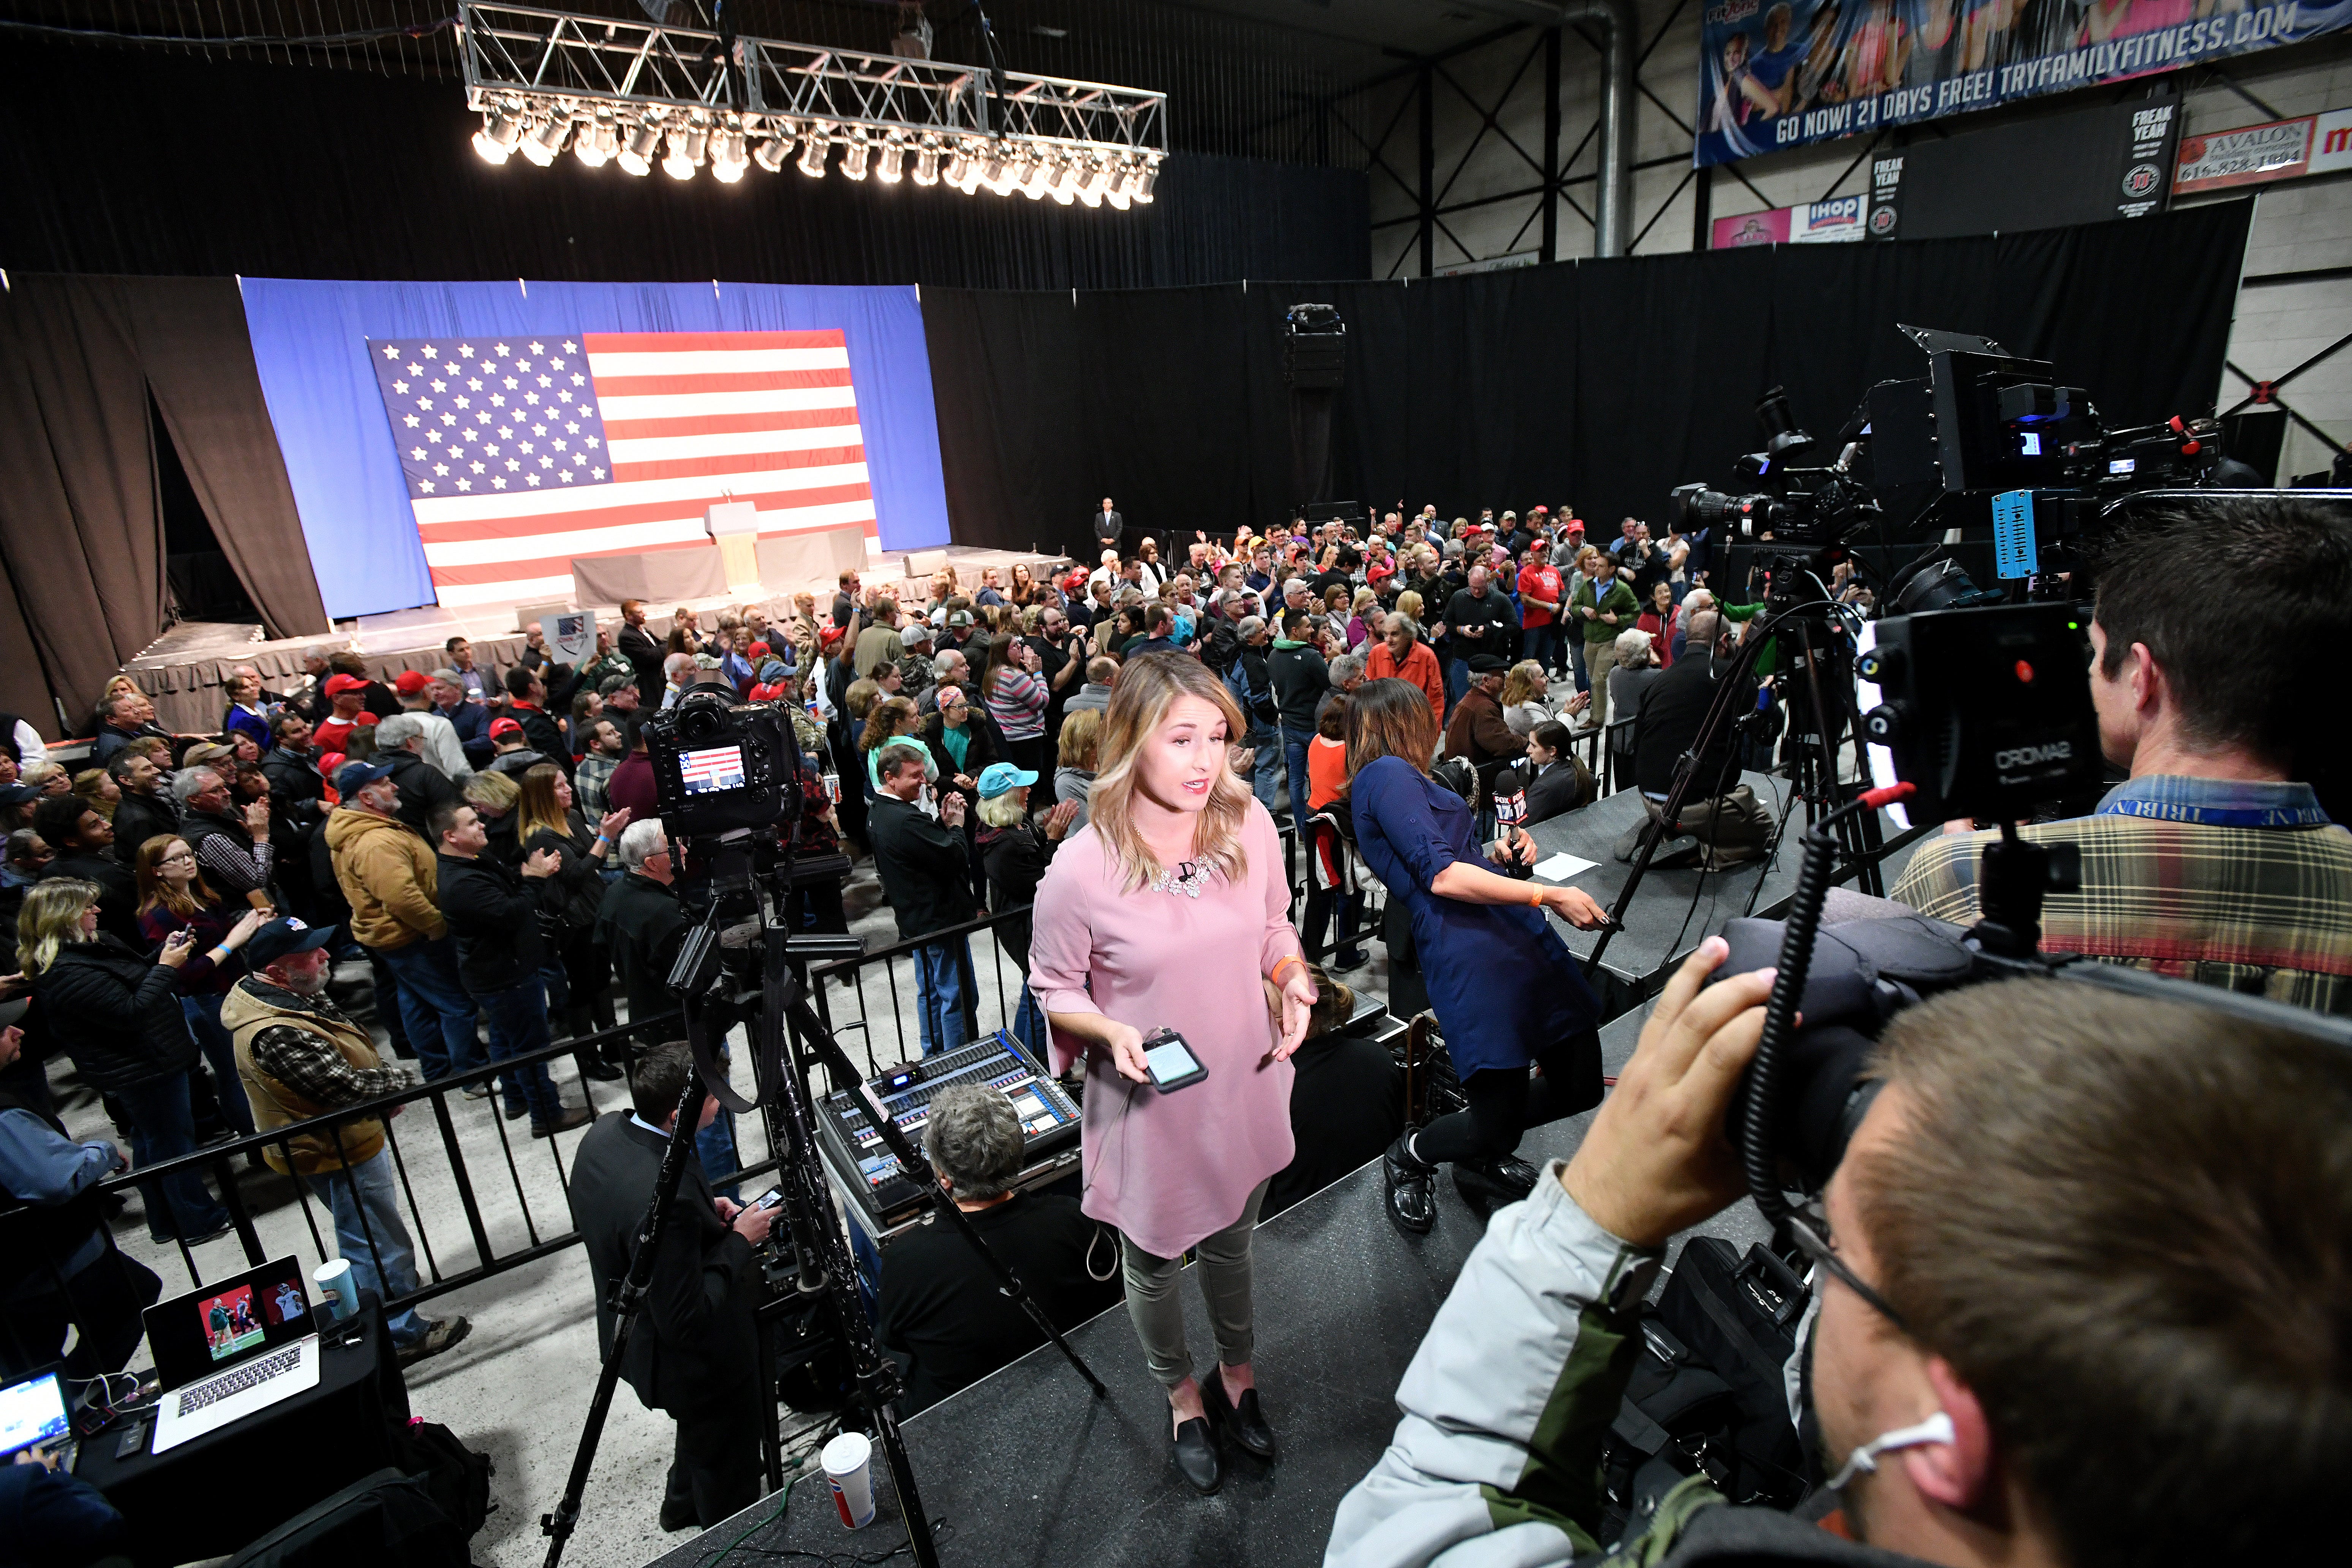 TV reporters warm up before Vice President Mike Pence campaigns with Republican candidates at the DeltaPlex in Grand Rapids on Monday, Oct 29, 2018.